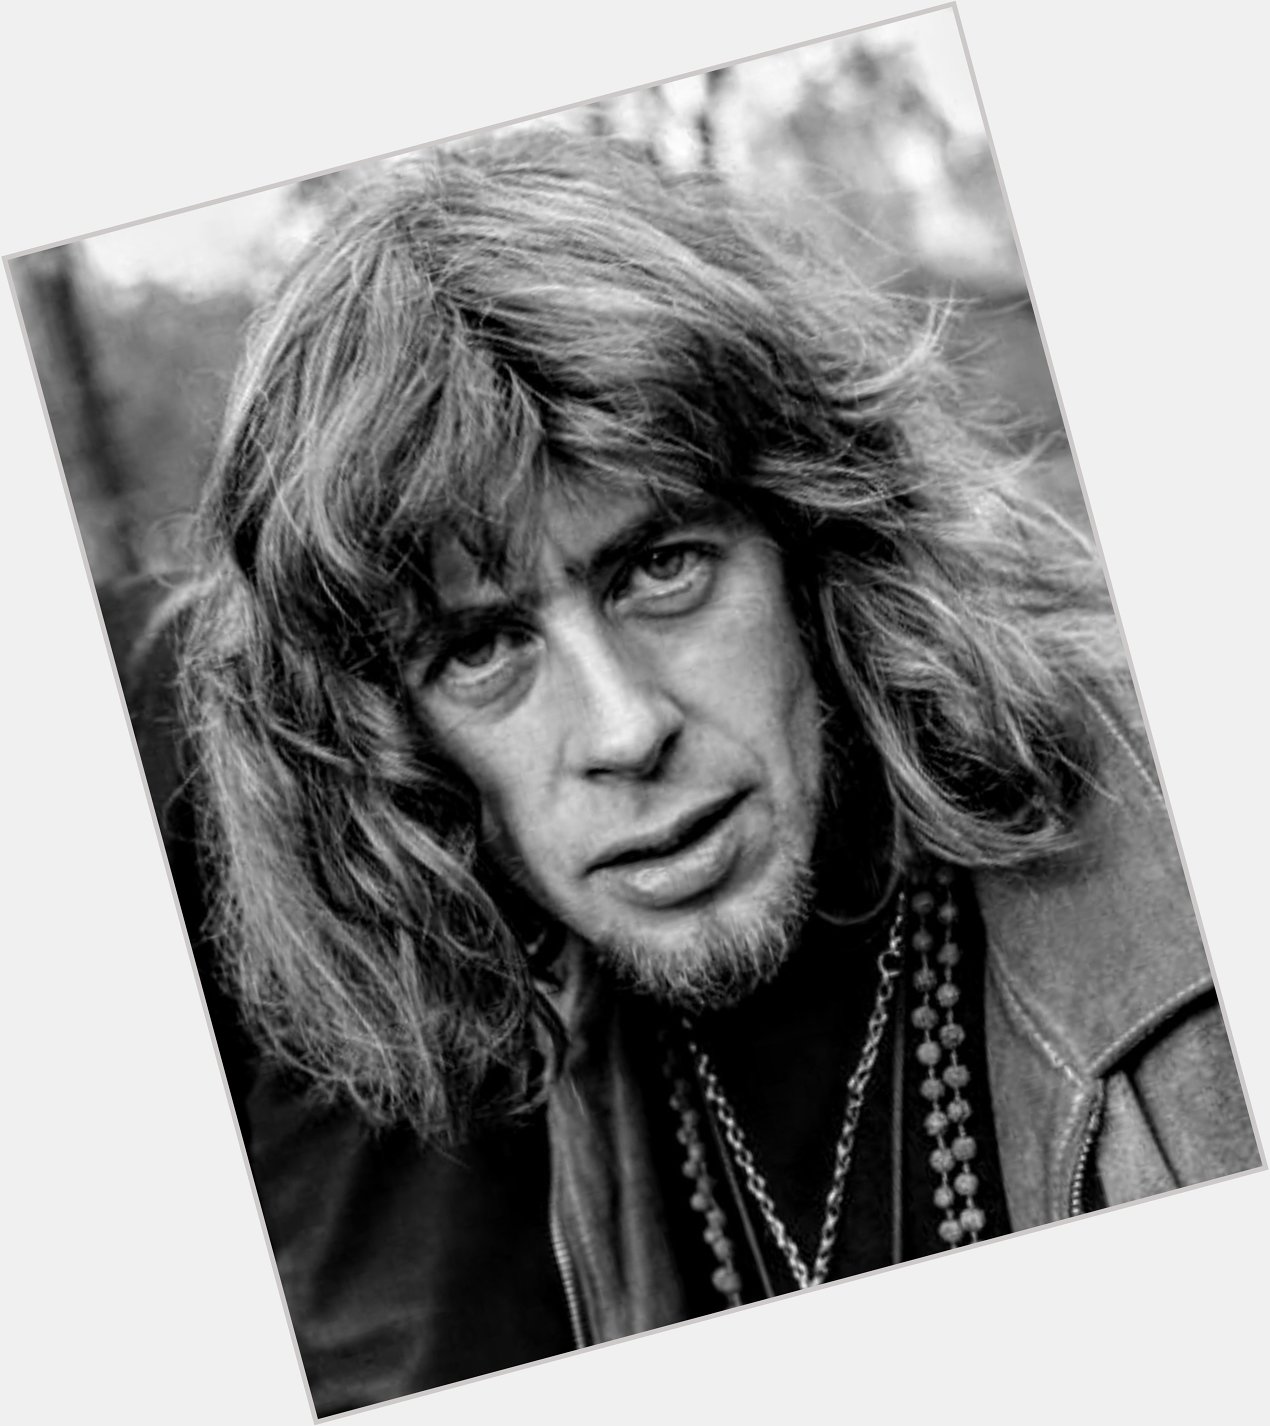 Happy Birthday to British blues pioneer John Mayall. Born on this day in 1933. 